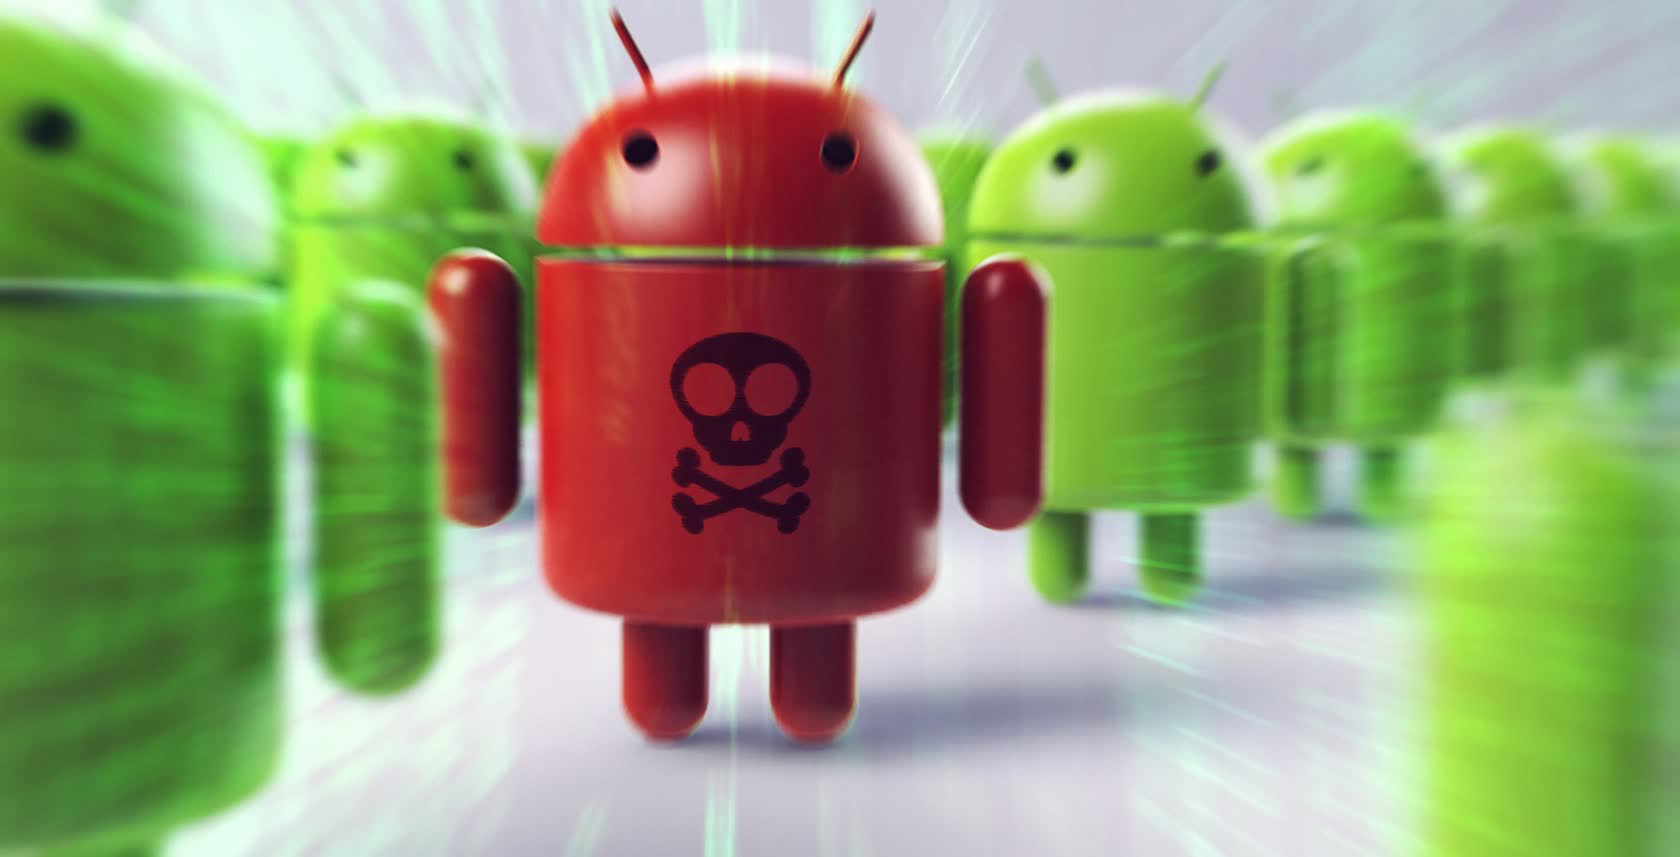 Malware discovered in 60 Android apps with over 100 million downloads